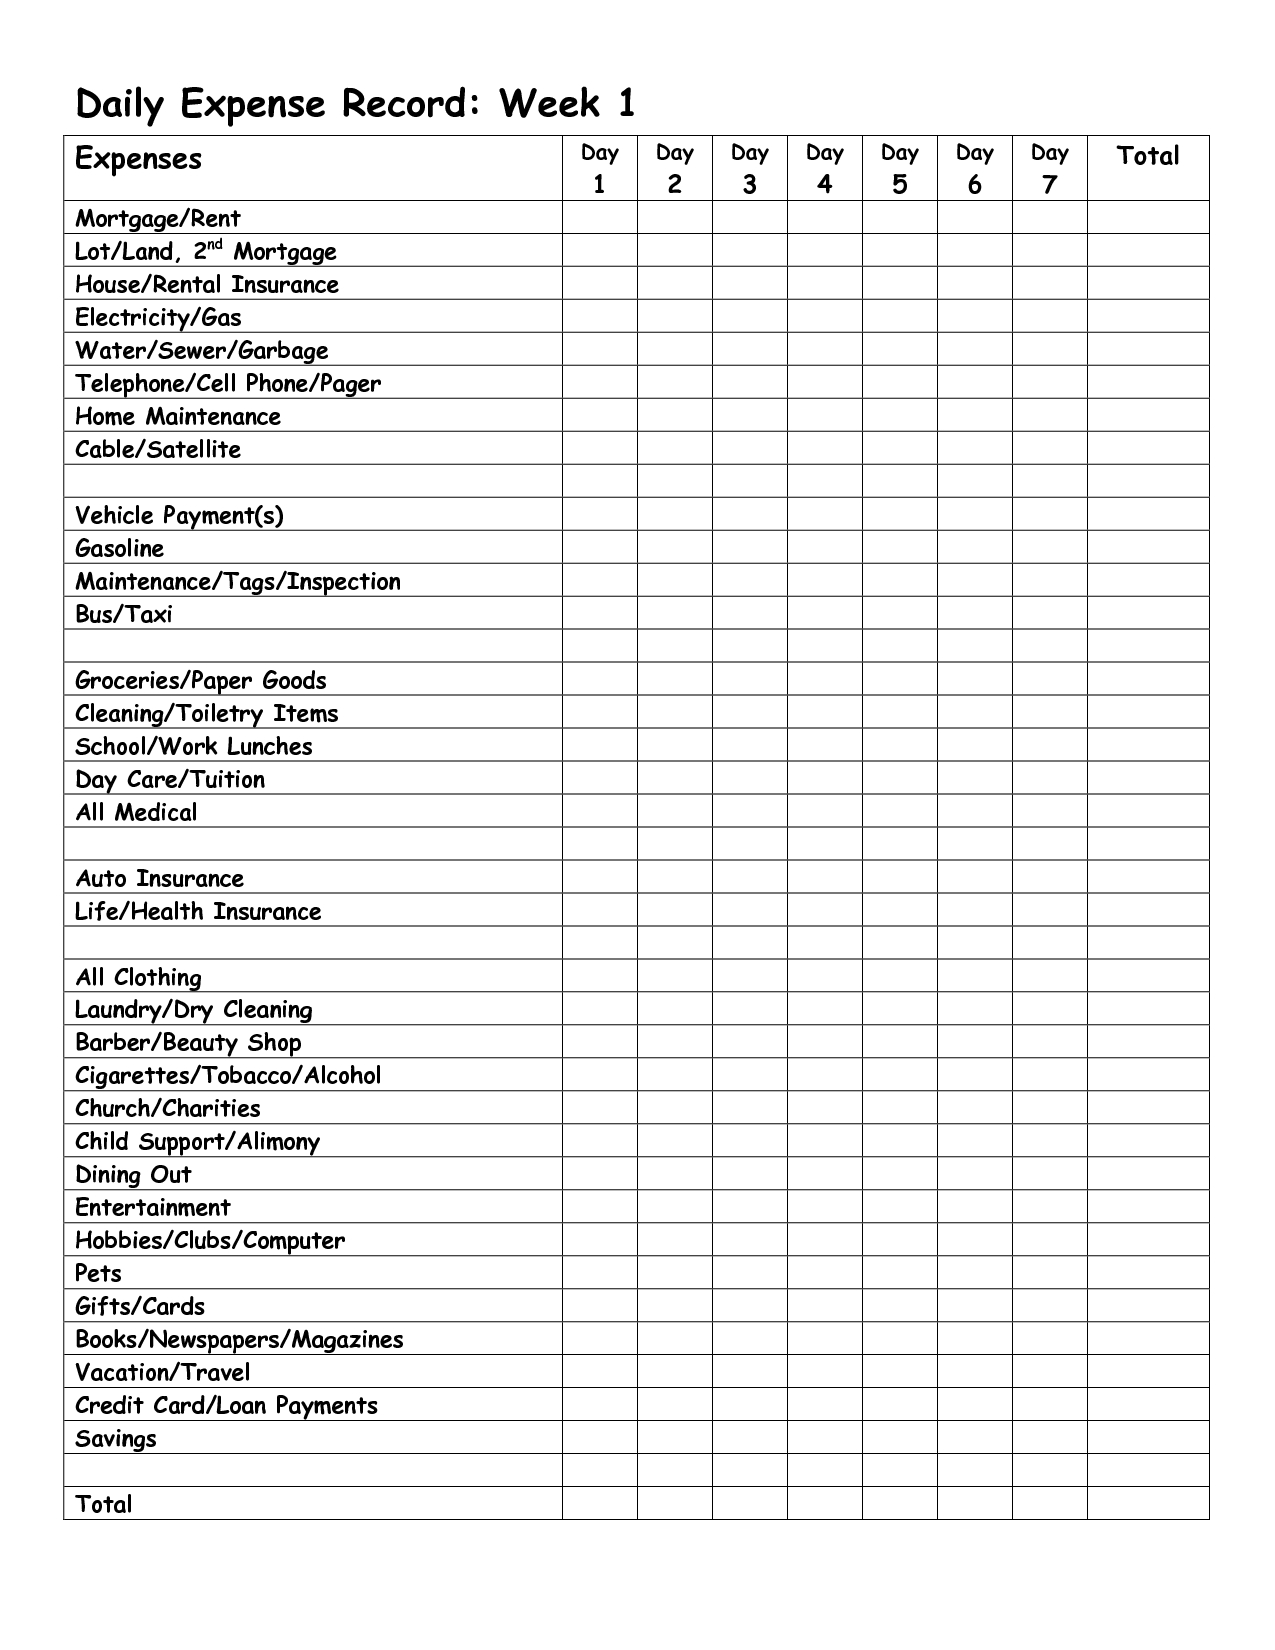 Monthly Expense Report Template | Daily Expense Record Week 1 | Daily Budget Worksheet Printable